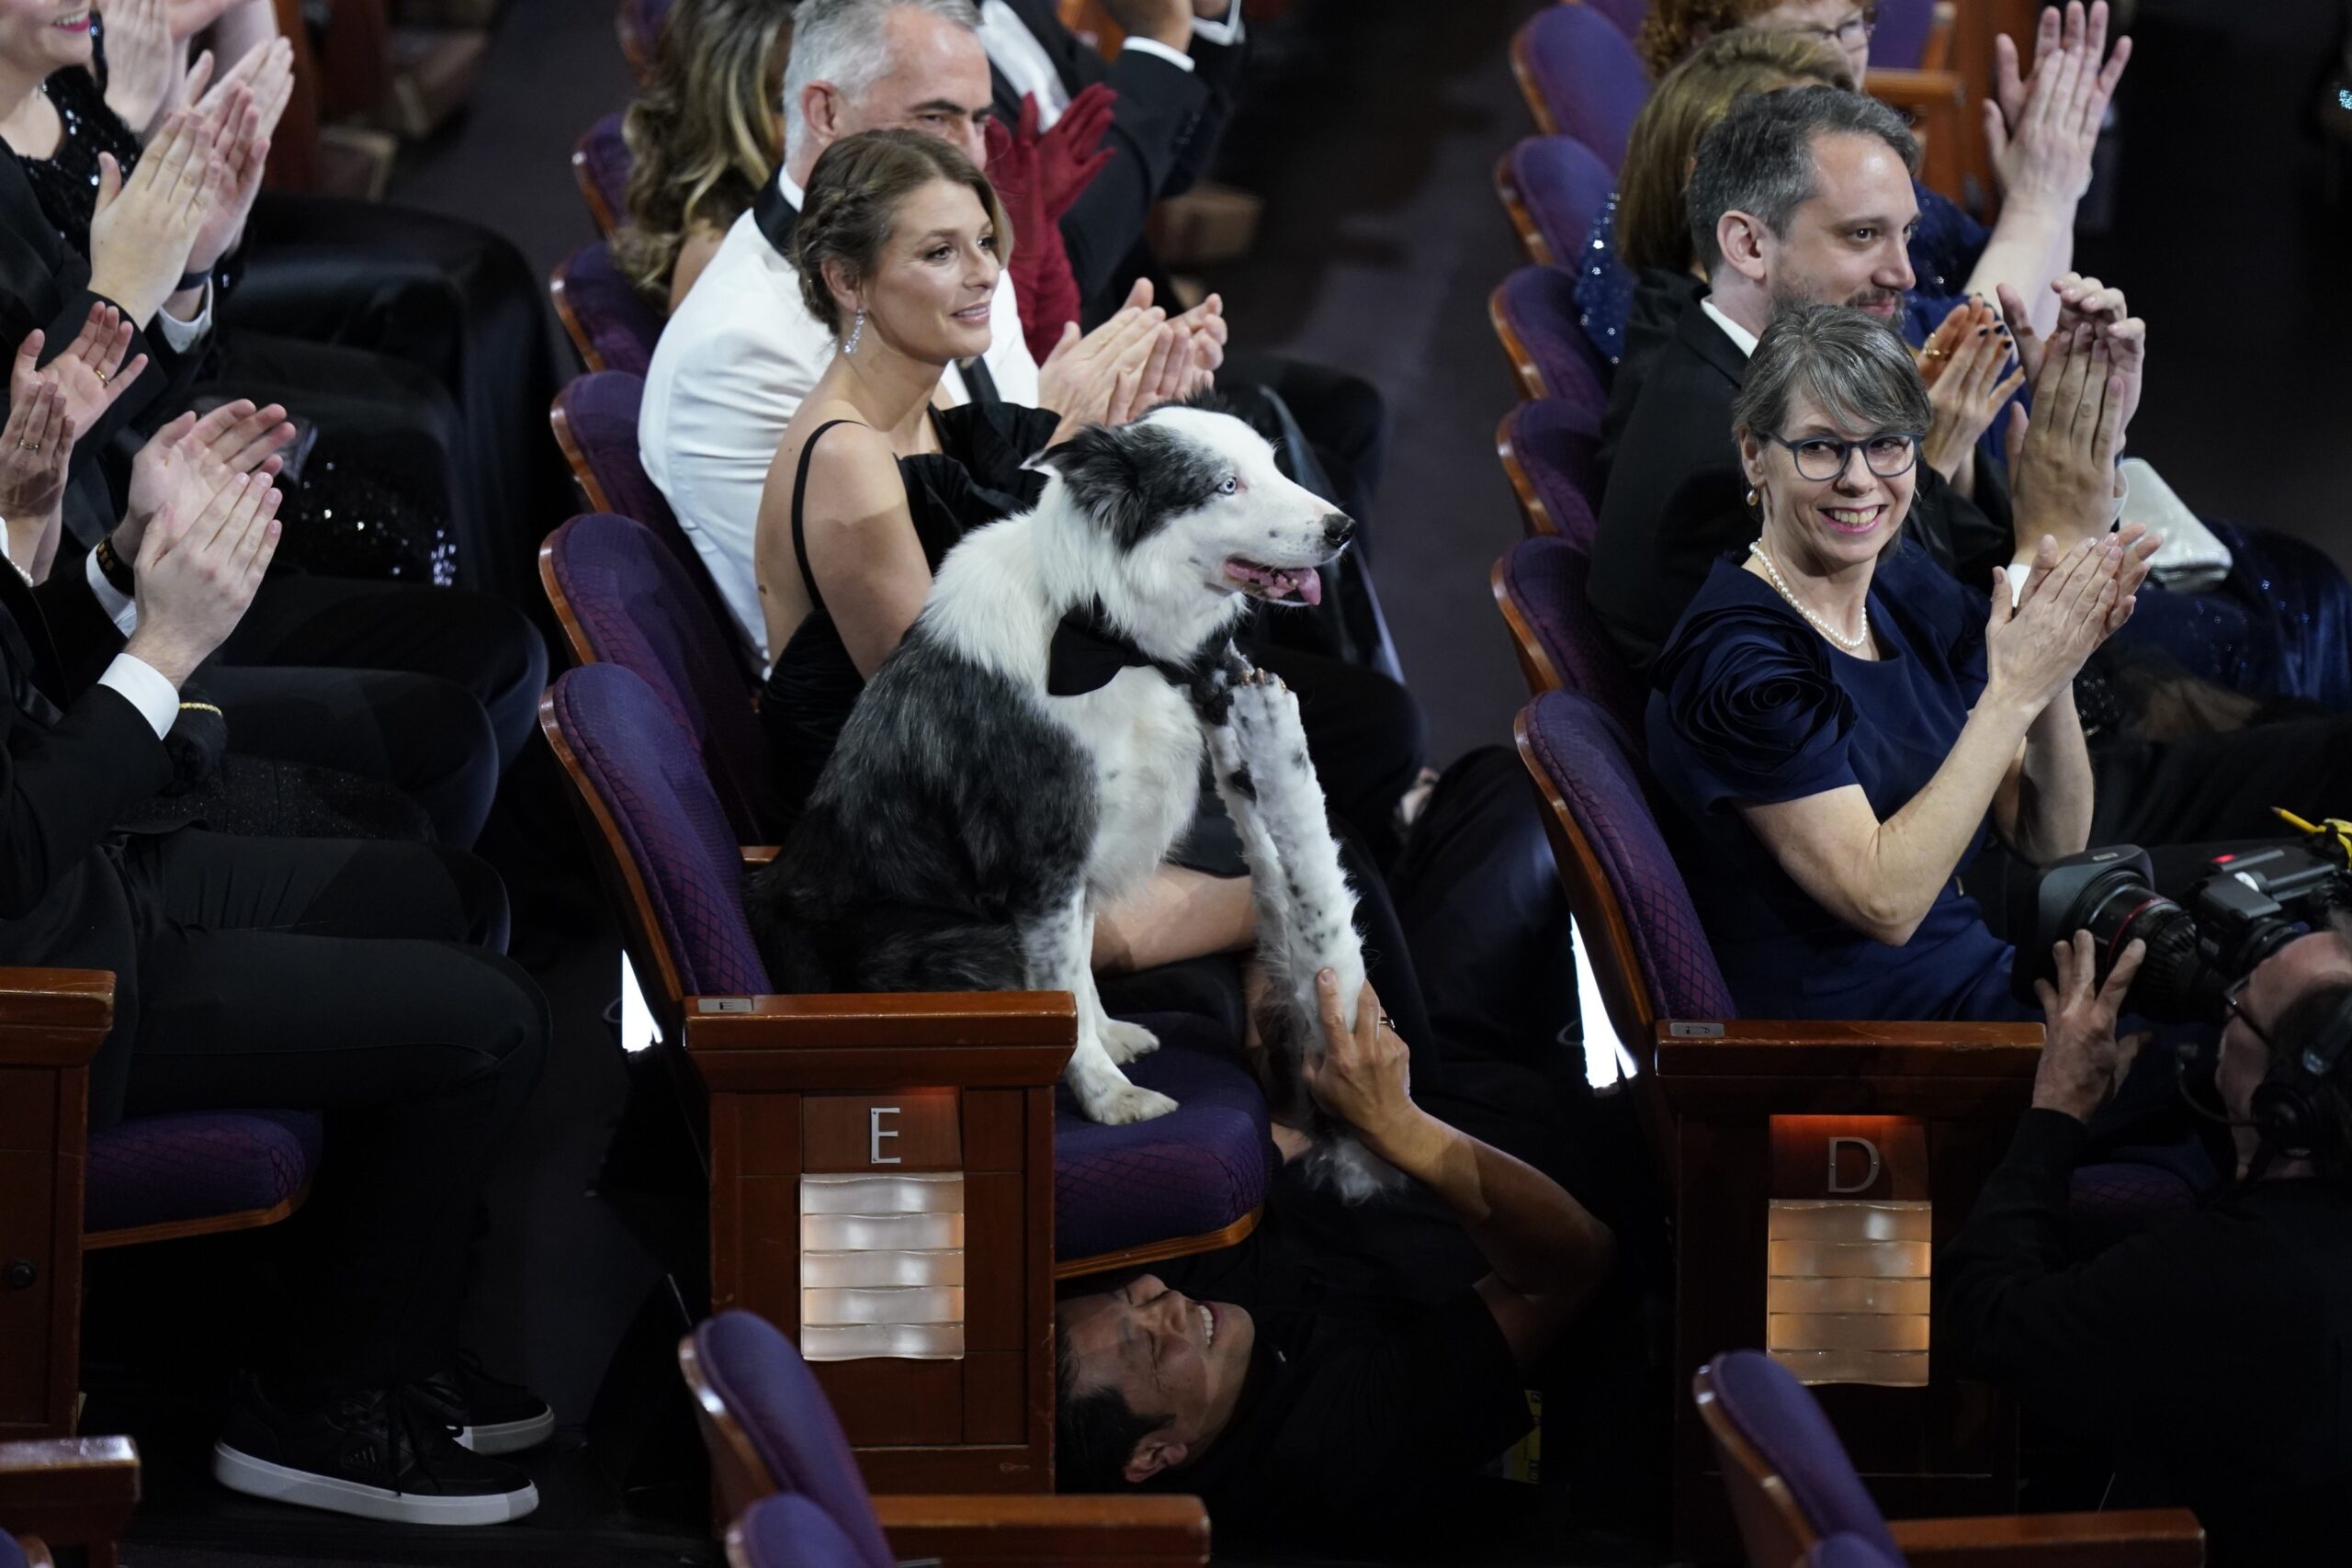 Mar 10, 2024; Los Angeles, CA, USA; Messi the dog is seen in a seat with a person holding prop dog paws below his seat before the start of the 96th Oscars at the Dolby Theatre at Ovation Hollywood in Los Angeles on Sunday, March 10, 2024..,Image: 855704892, License: Rights-managed, Restrictions: *** World Rights ***, Model Release: no, Credit line: USA TODAY Network / ddp USA / Profimedia